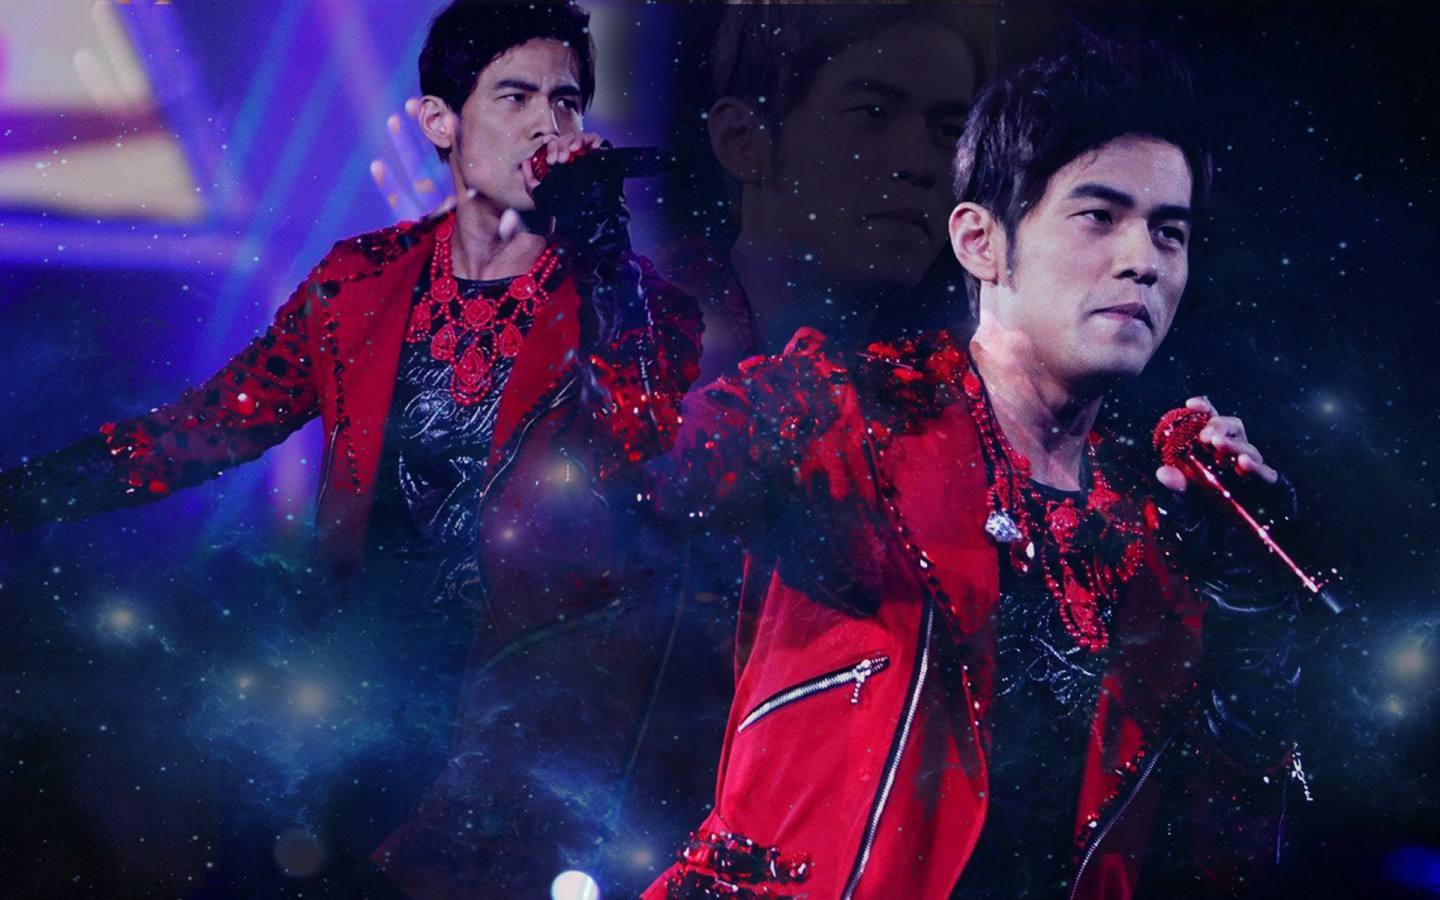 The new song is coming. Don't be frightened! Jay Chou responded to his fans late at night and began recording songs.